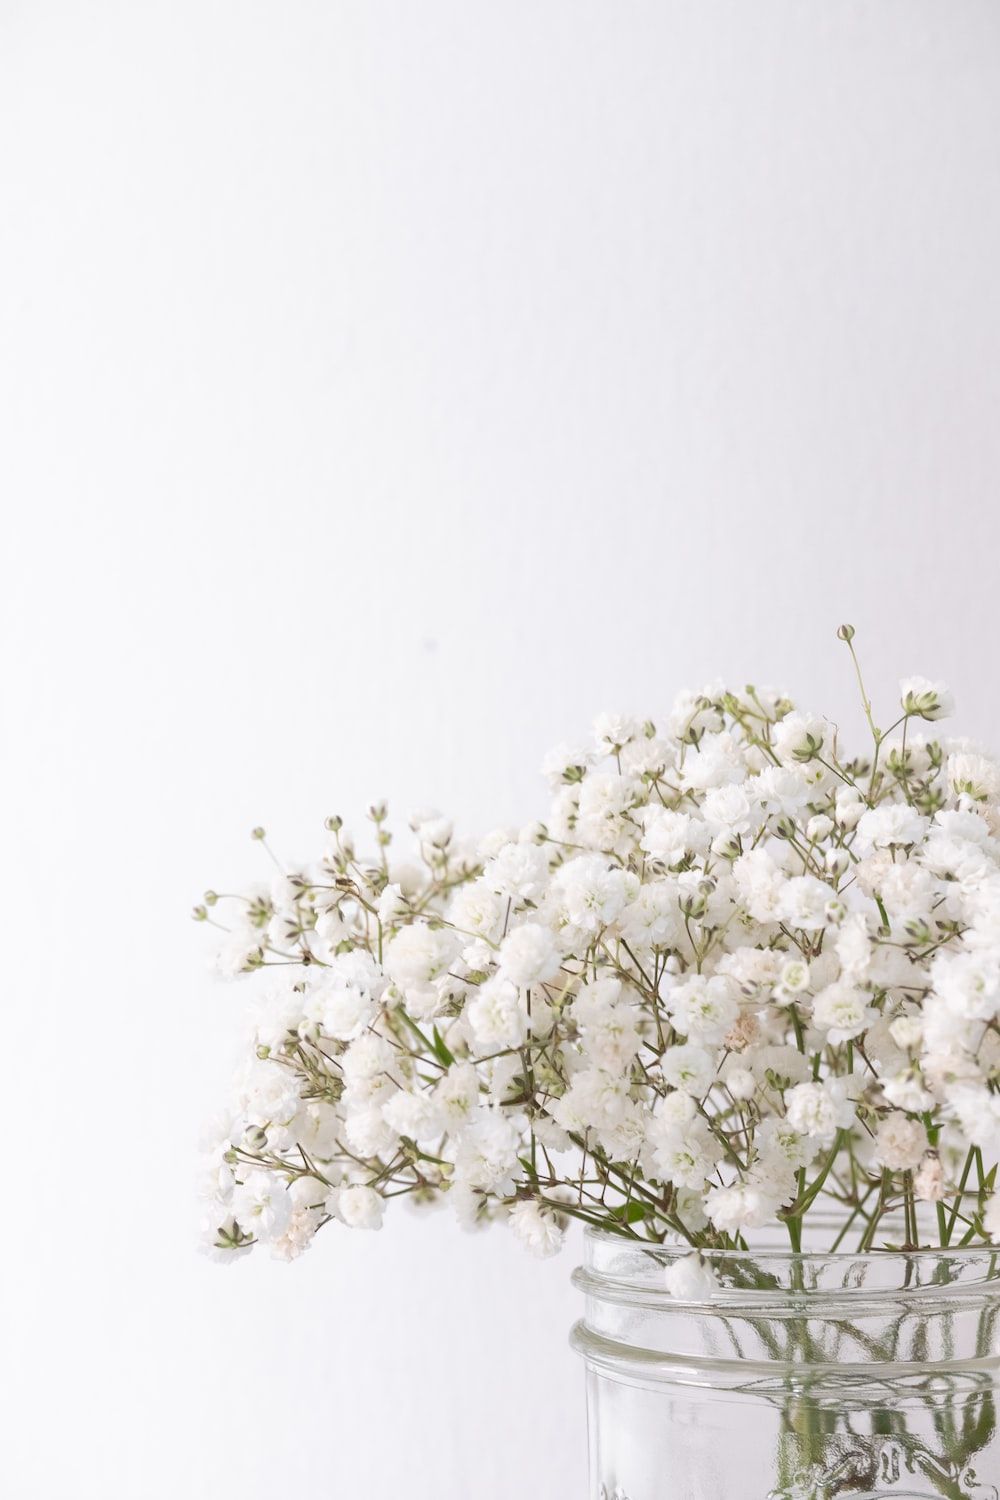 Baby Breath Picture. Download Free Image